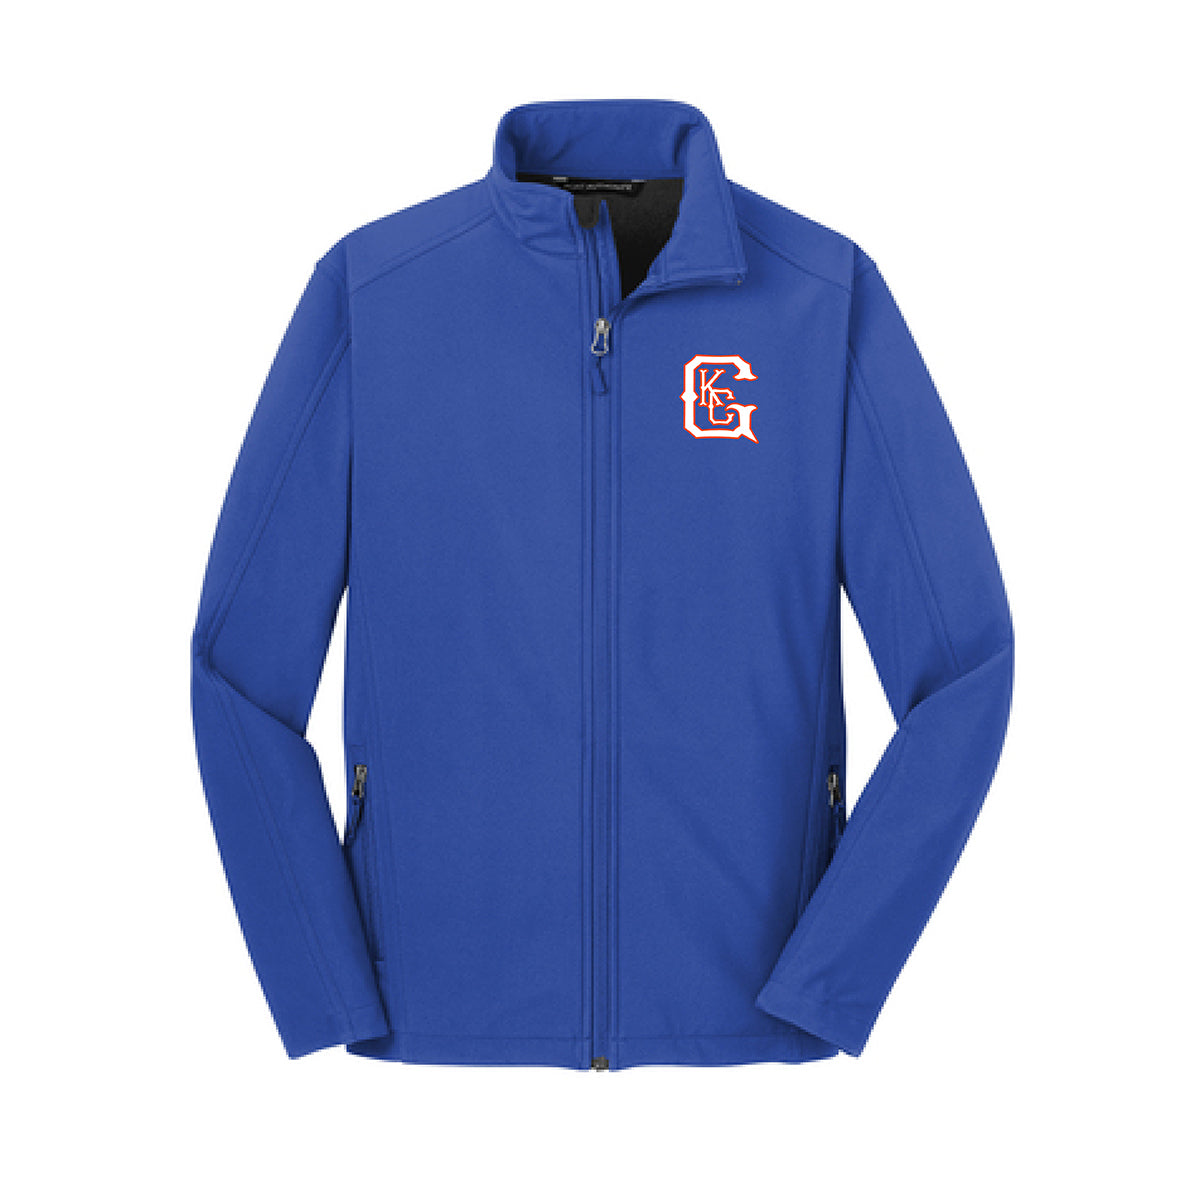 Adult Core Soft Shell Jacket in Royal